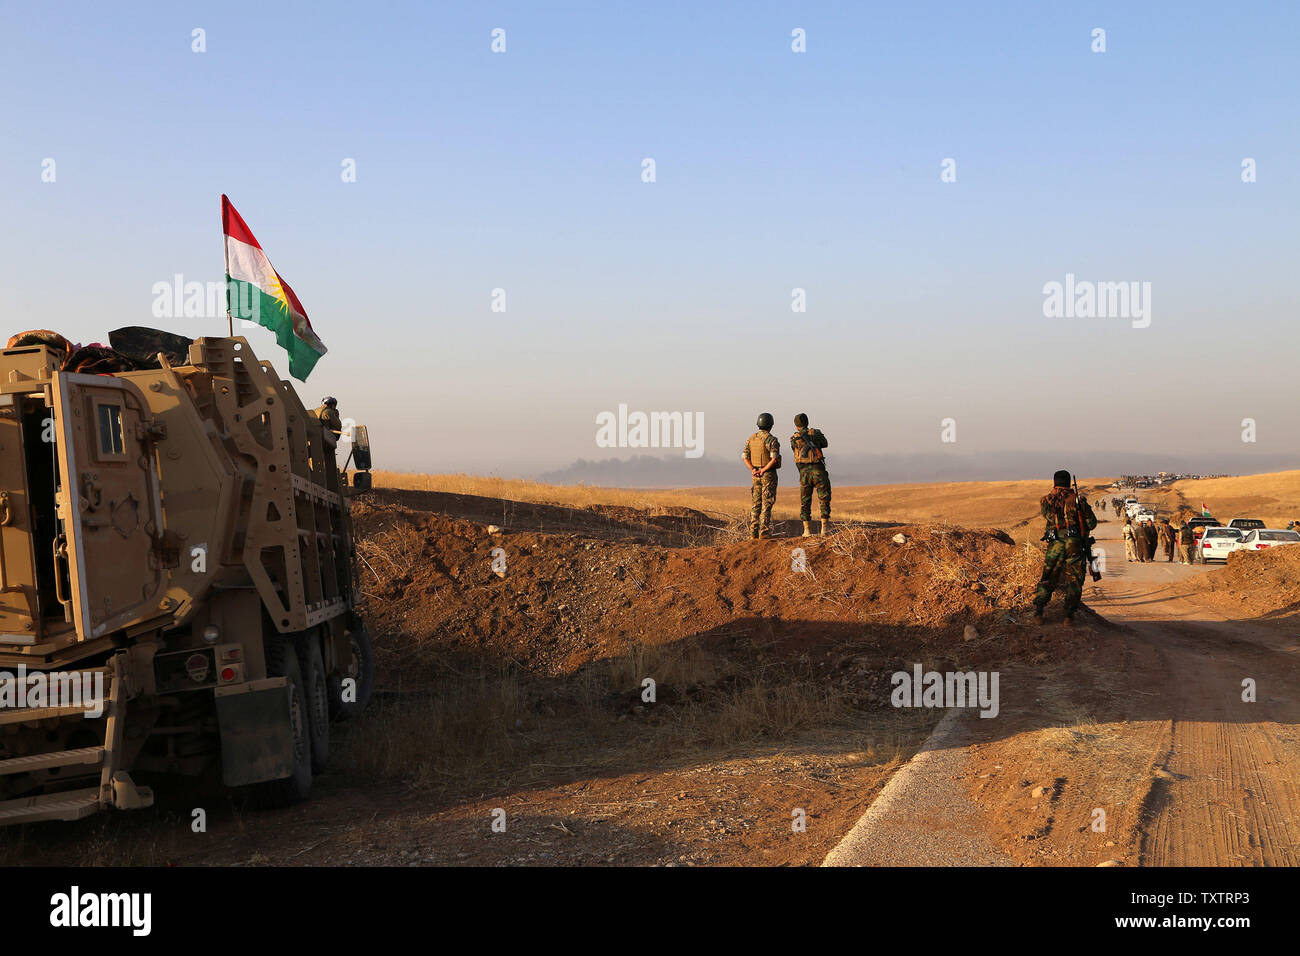 Peshmerga forces transport military vehicles in Dohuk, north  of Mosul, during an operation to attack Islamic State militants in Mosul, Iraq, October 20, 2016. photo by Shvan Harki/ UPI Stock Photo